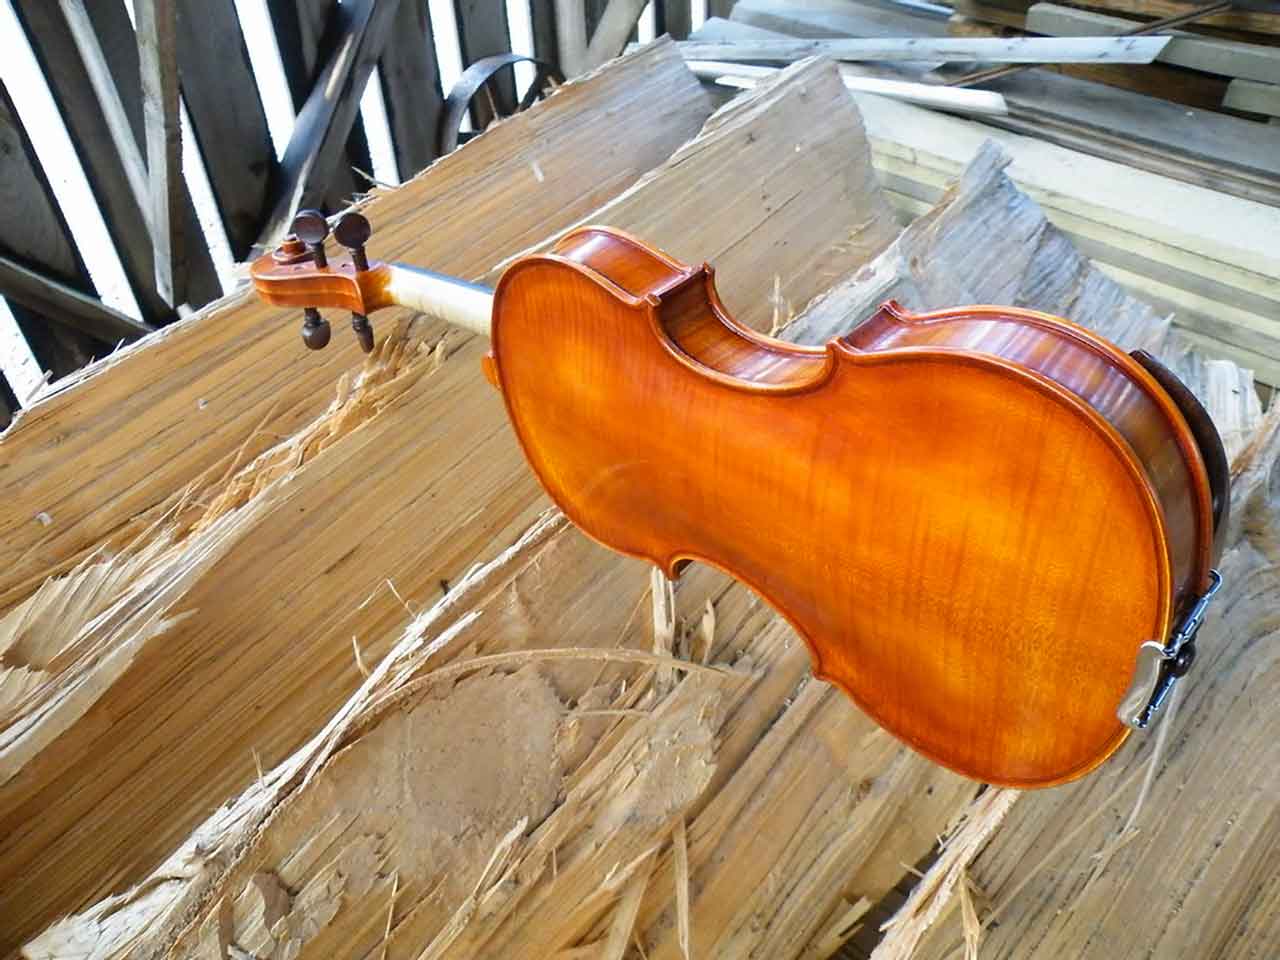 William A Mackay Luthiery joined Luthiers.com